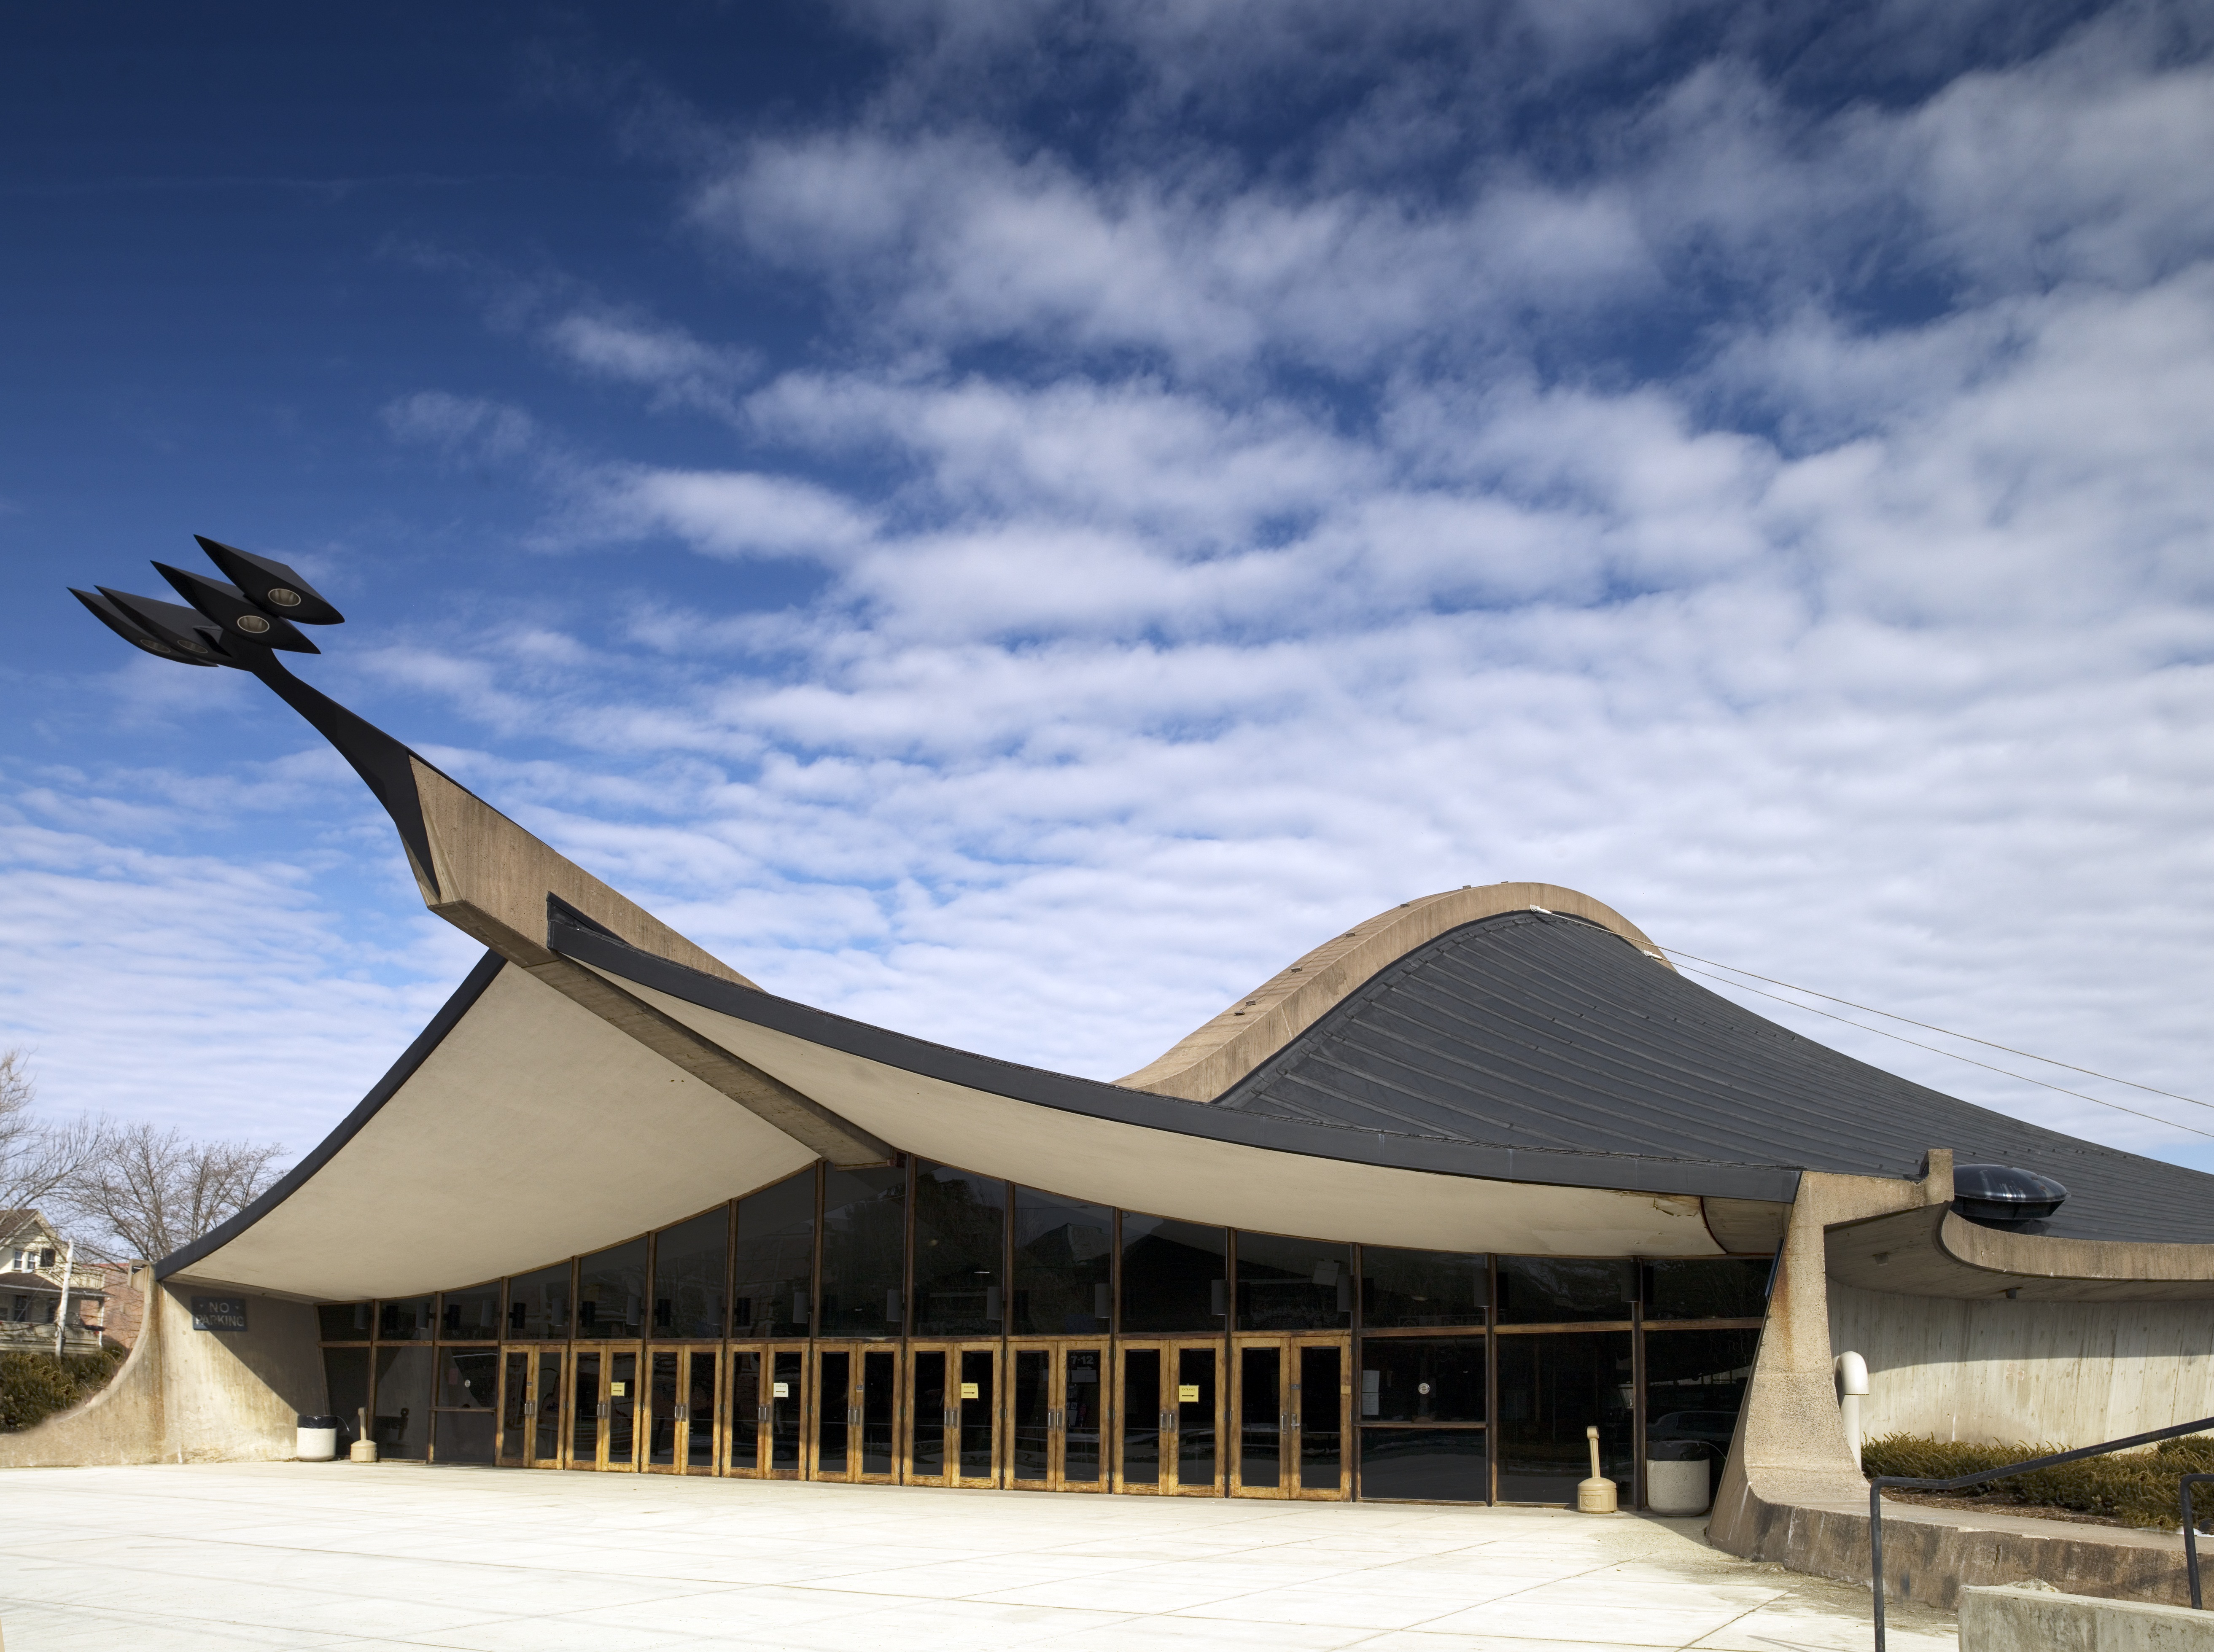 Ingalls Ice Arena, New Haven, Connecticut. David S. Ingalls Rink is a hockey rink designed by architect Eero Saarinen and built between 1953 and 1958 for Yale University. Commonly referred to as The Whale, due to its appearance.